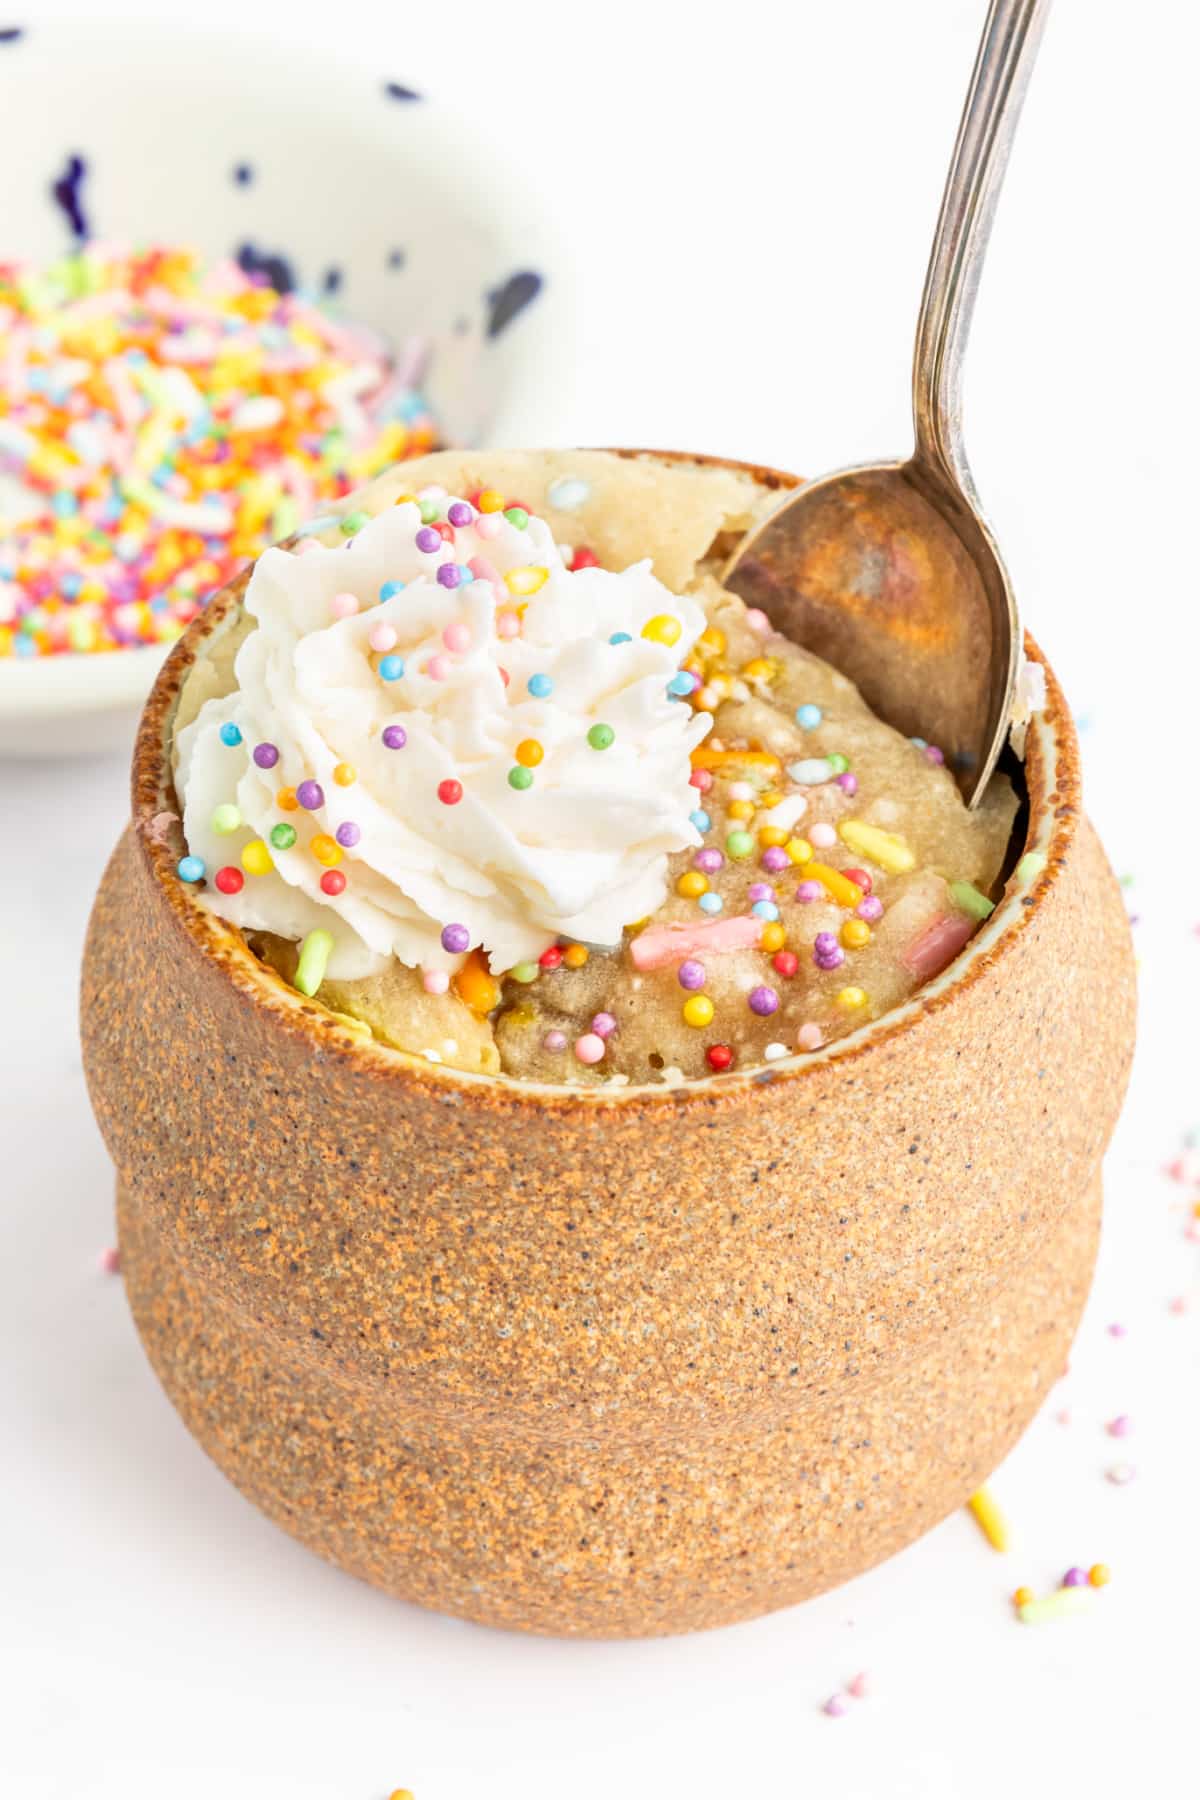 A spoon sits in a vanilla mug cake in the light brown pottery mug it was cooked in. Cake is yellow with sprinkles and is topped with whipped cream.